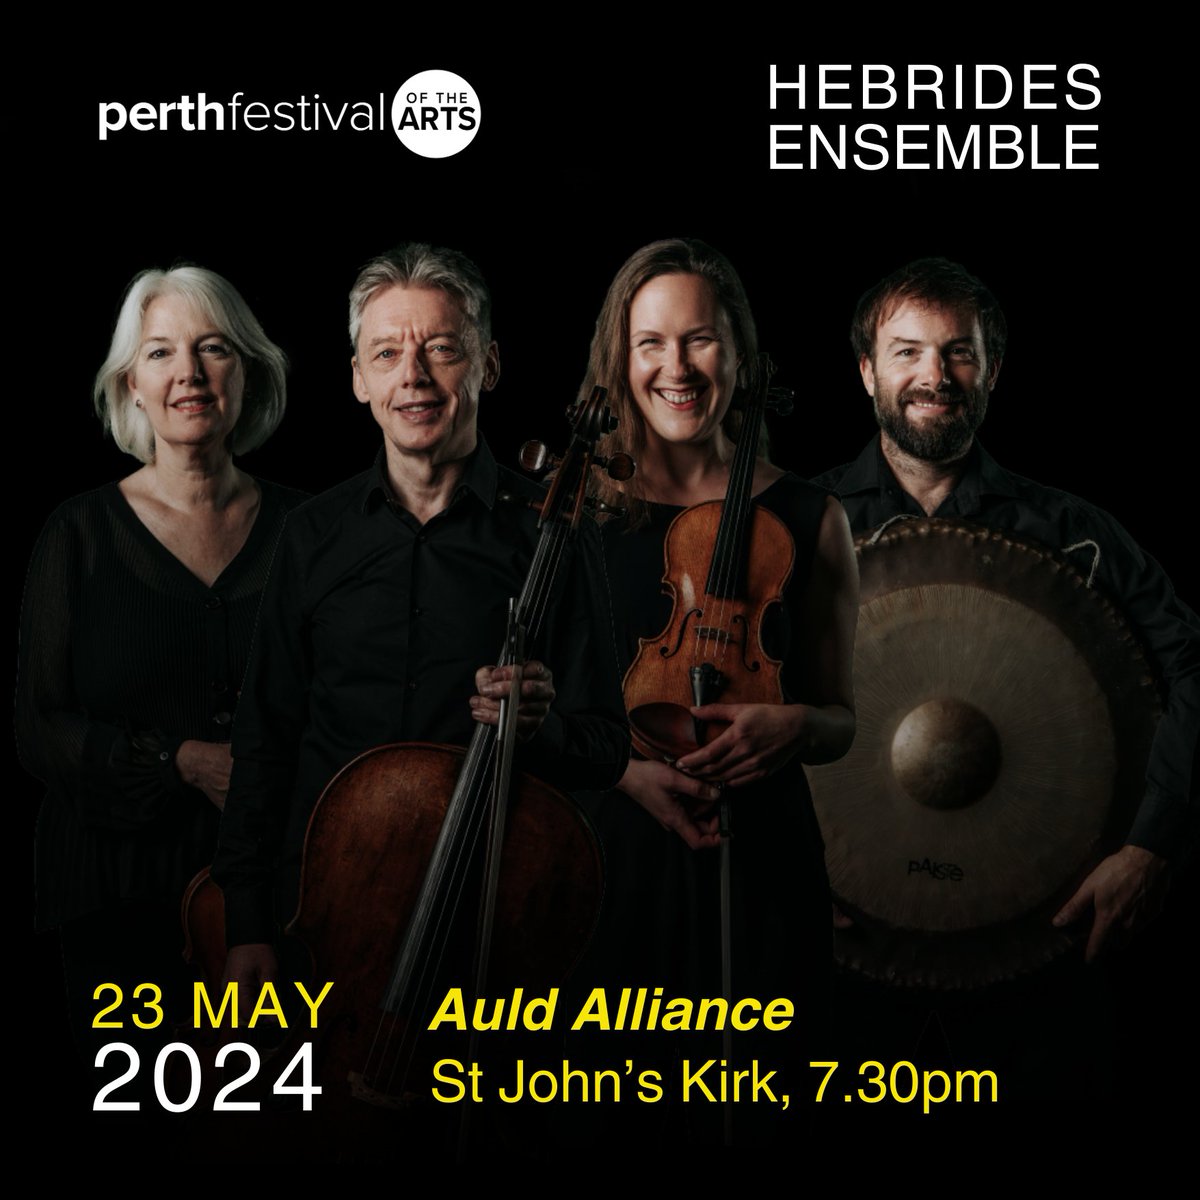 We are thrilled to be making our first ever appearance @PerthFestival on 23 May. French & Scottish music in beautiful St John's Kirk - what could be better! Do join us! 🎟 Tickets on sale to Festival Friends on 18 March. General sales from 25 March. perthfestival.co.uk/event-Hebrides…